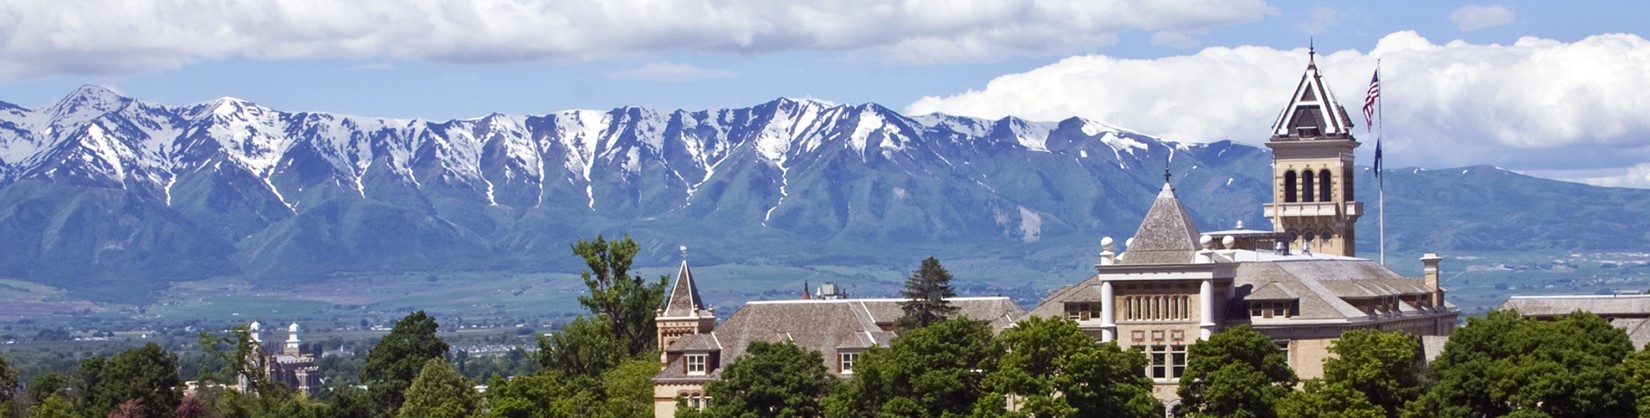 Crests of Wellsville Mountains with USU’s Old Main in foreground.